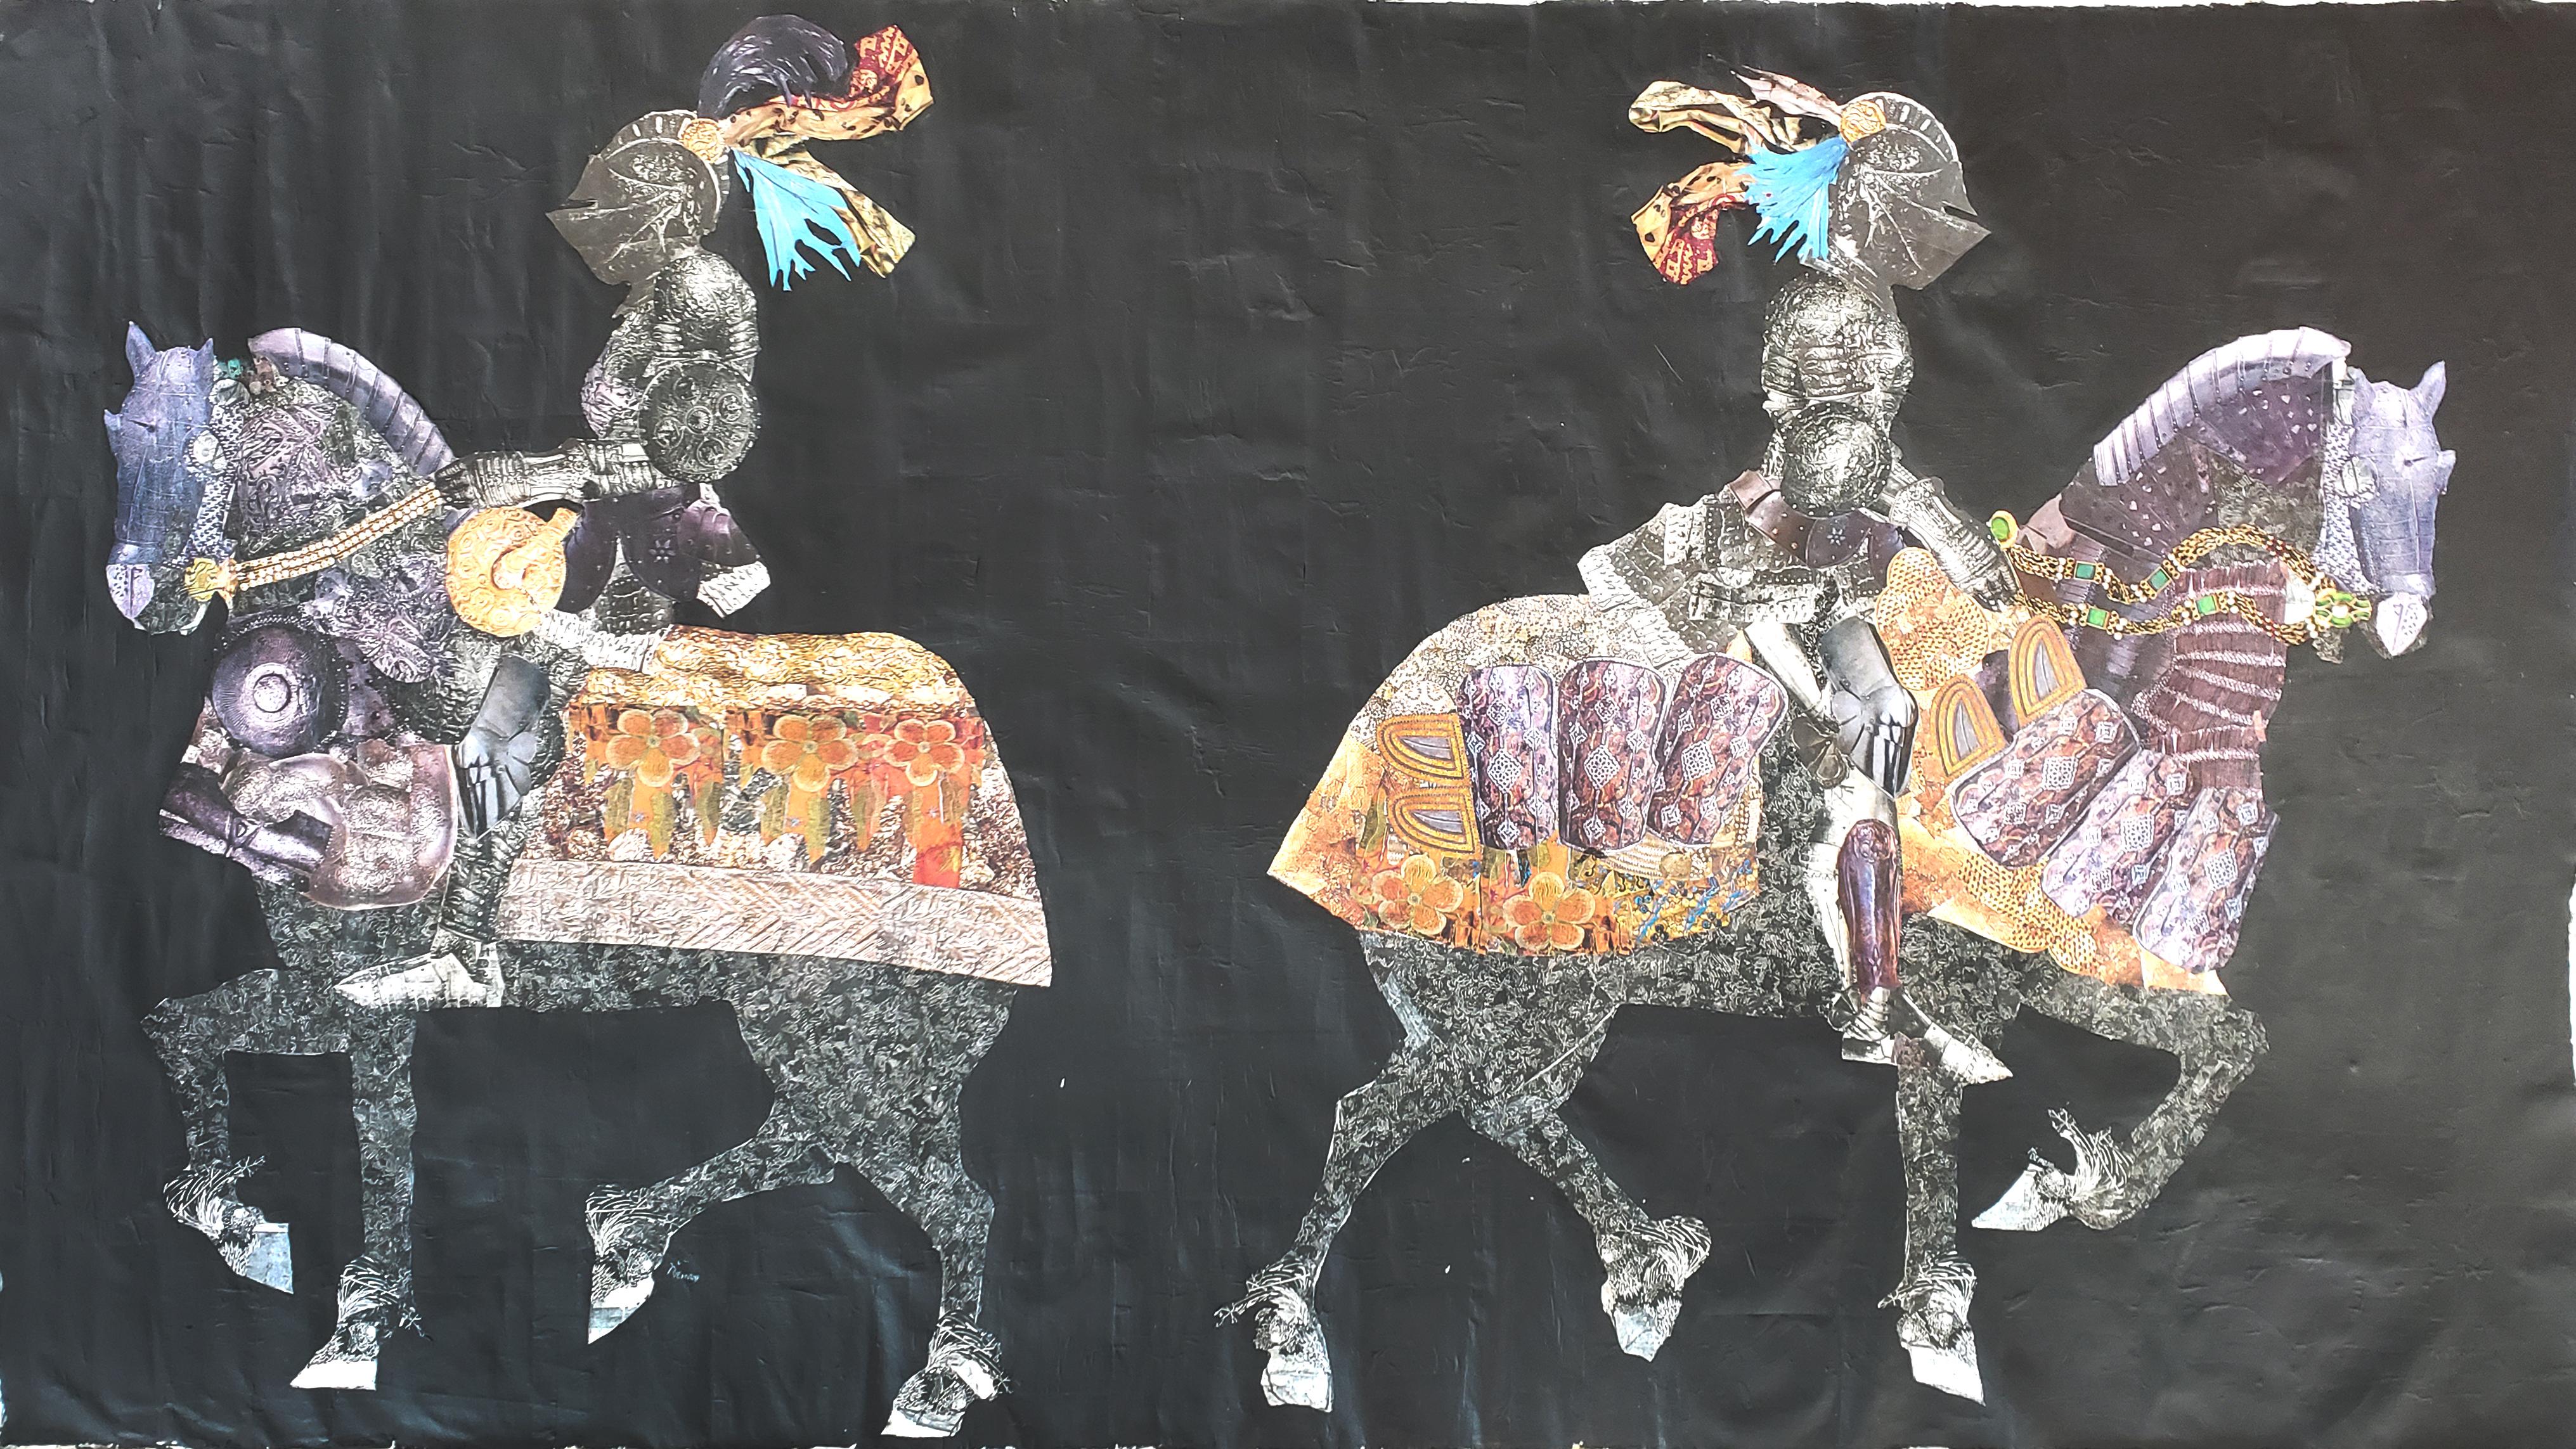 Demond Matsuo  Animal Painting - "Two Knights" 2018, Mixed Media, Collage and Paper on Unstretched Canvas